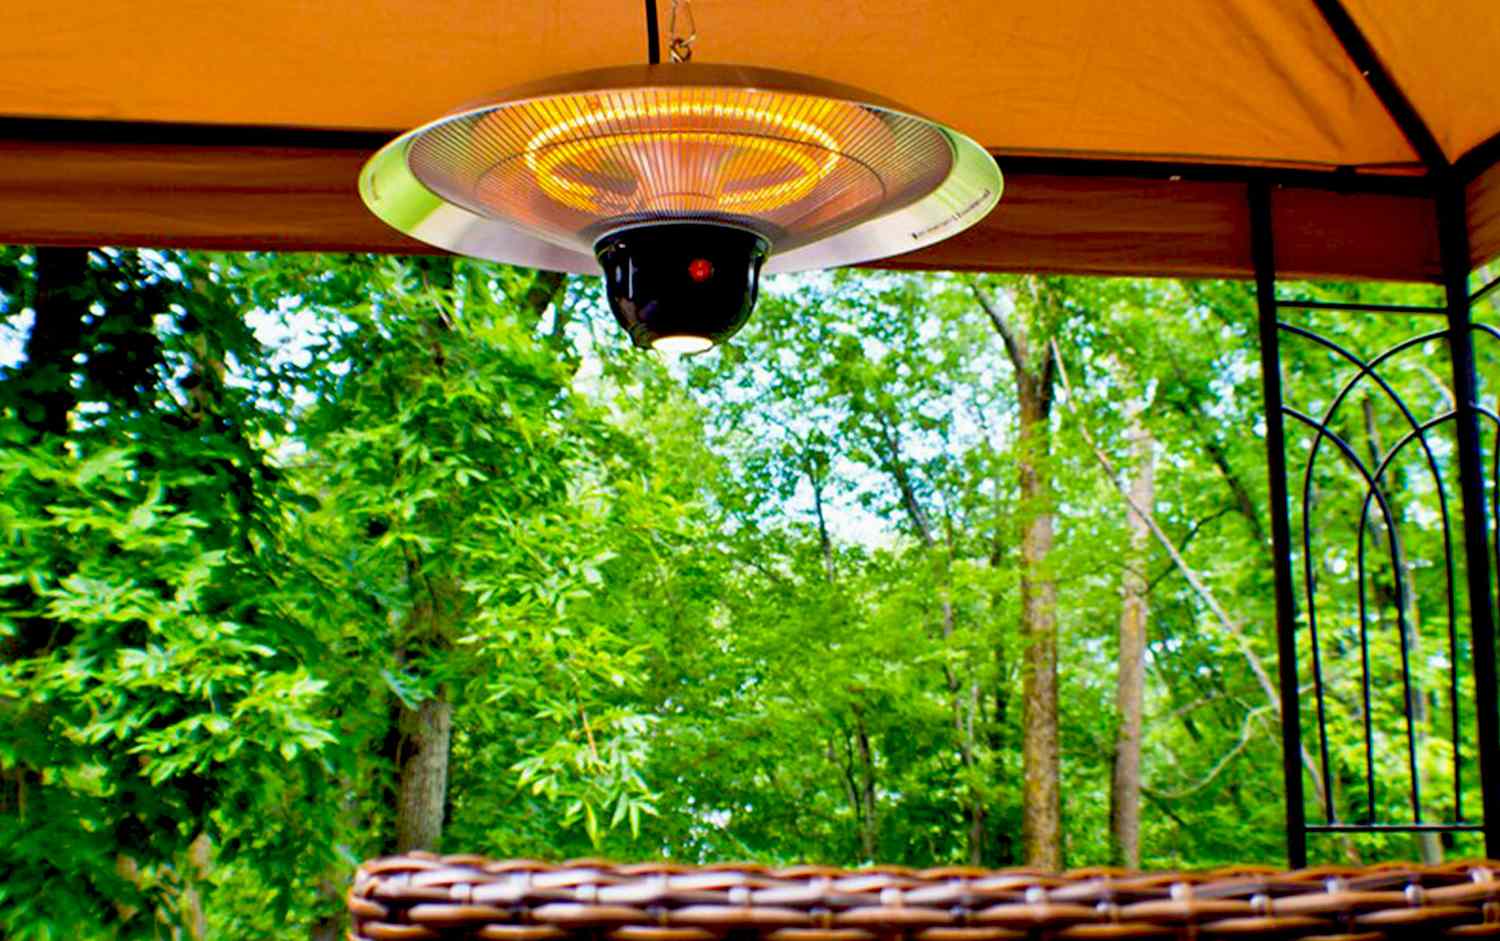 Electric hanging patio heater